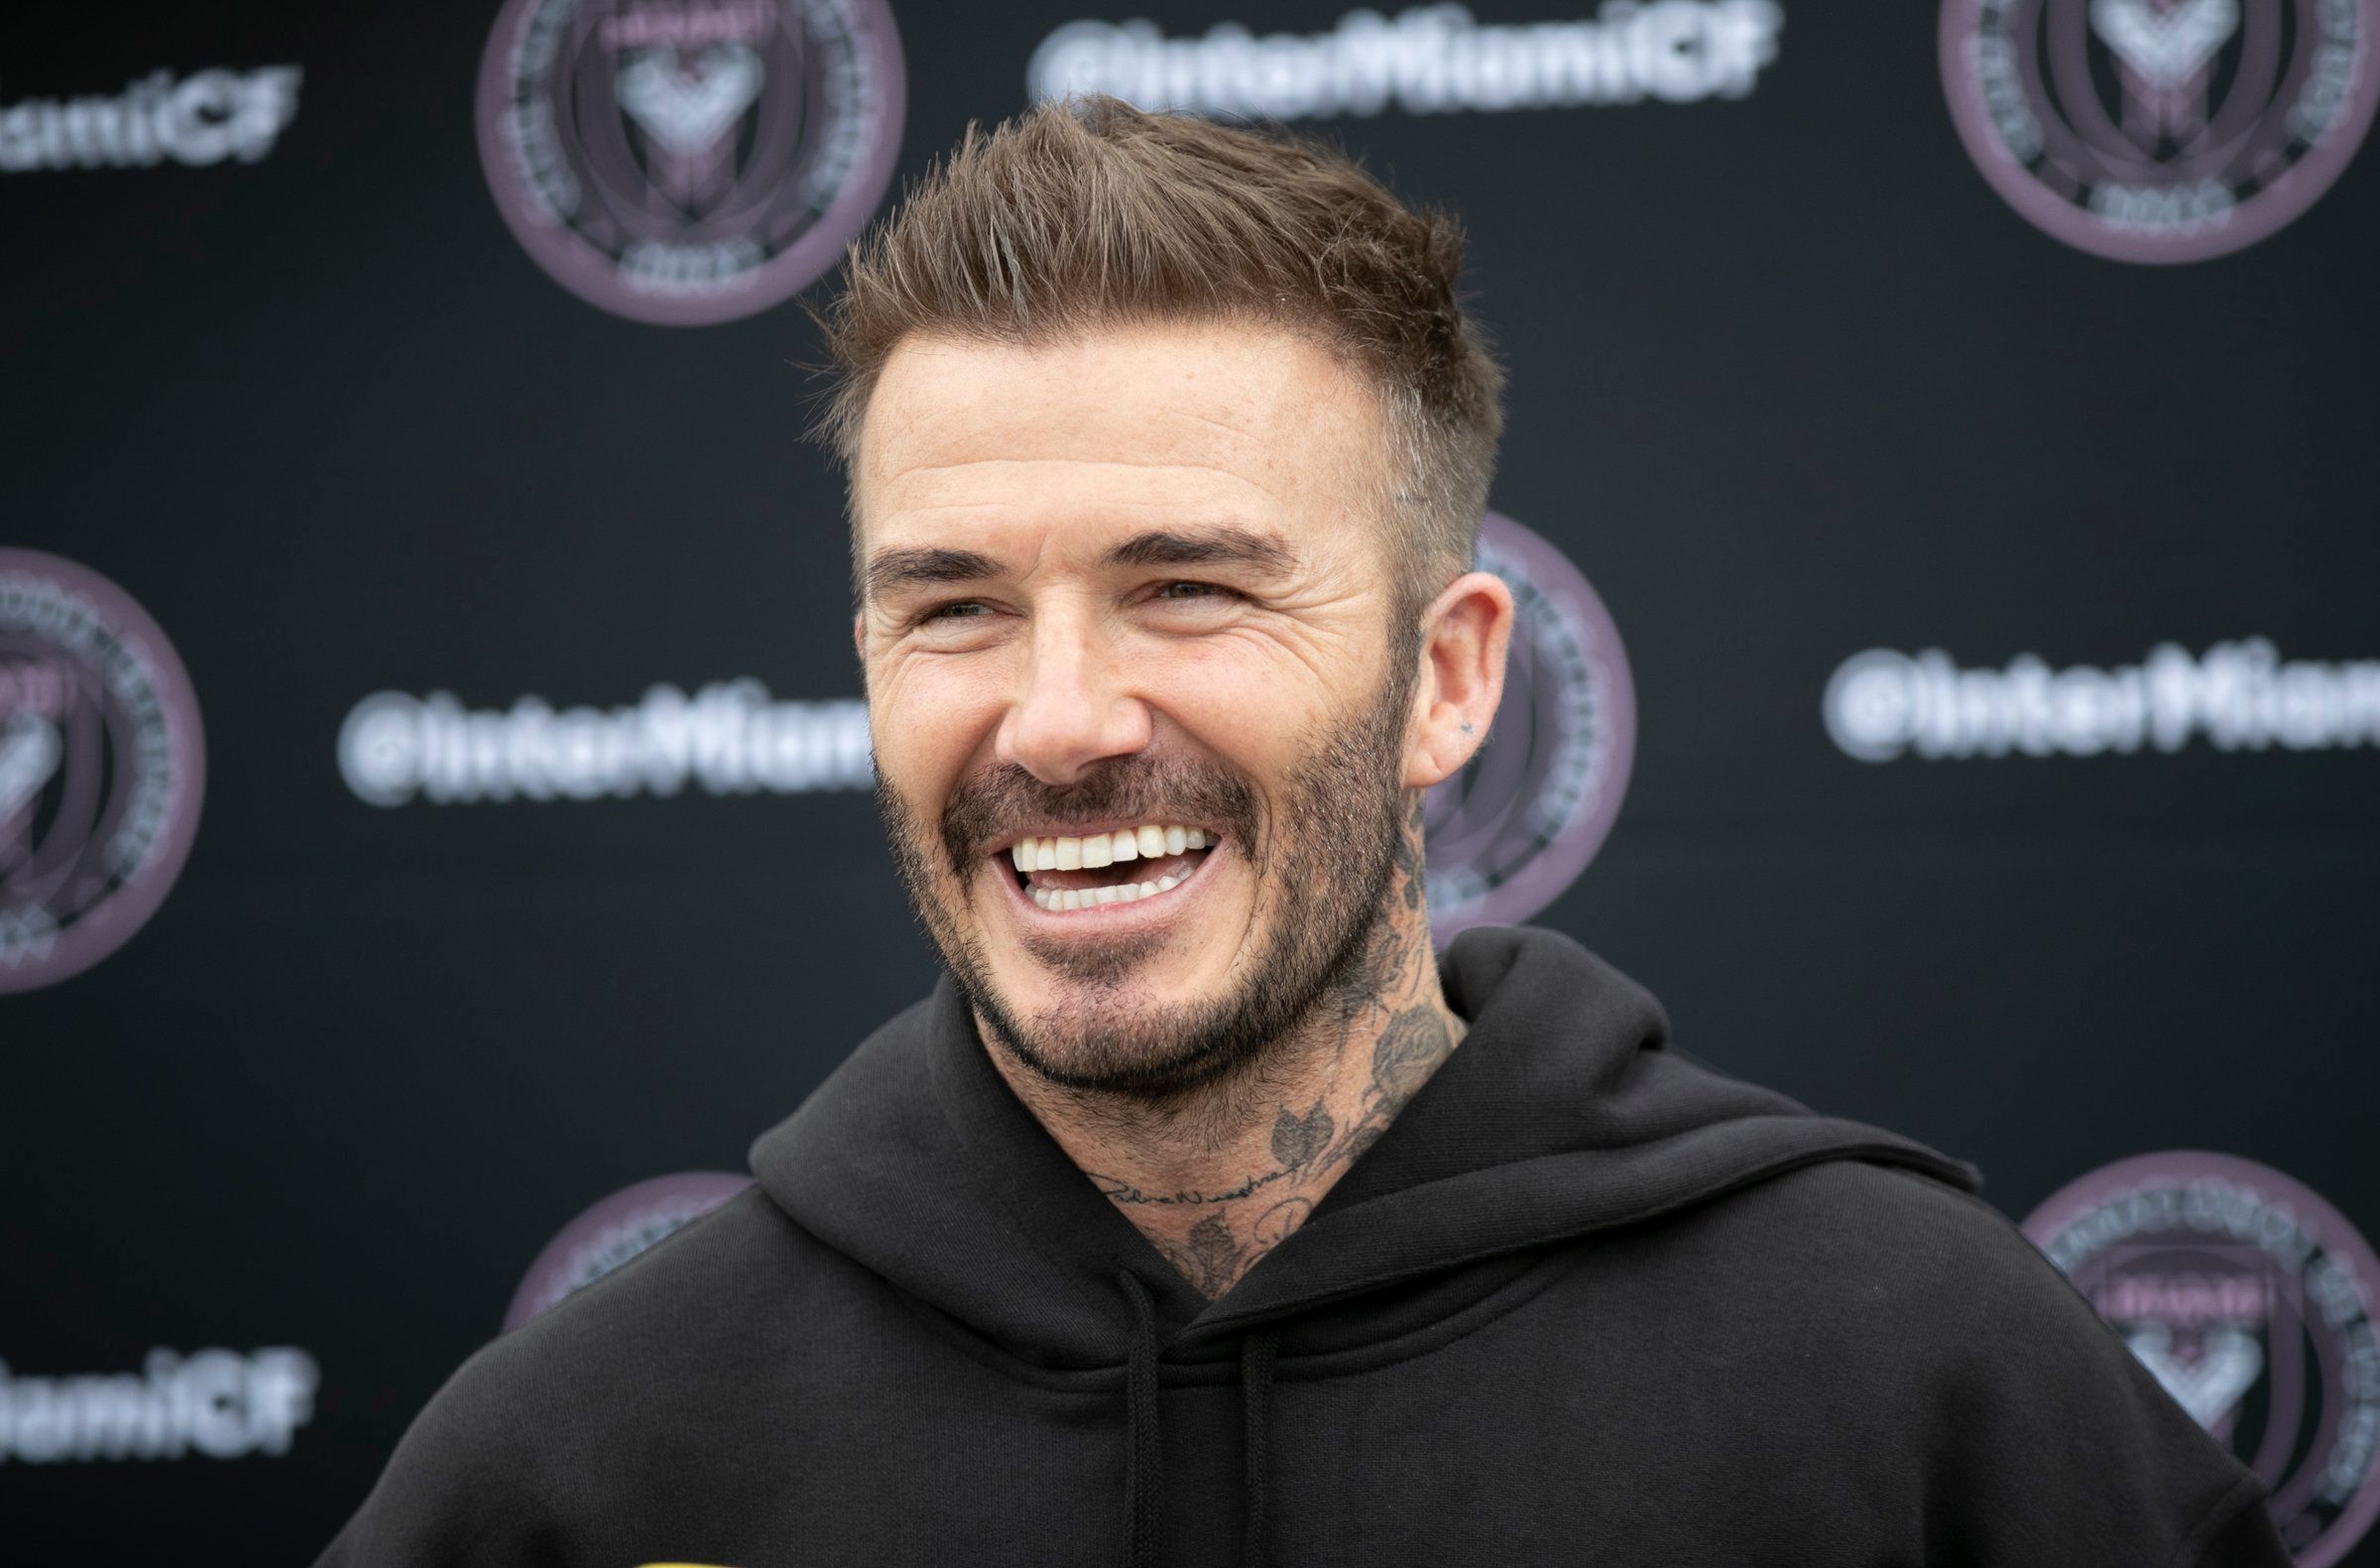 David Beckham during the Inter Miami CF team at Inter Miami Stadium and Training Complex in Fort Lauderdale, Fla., on Tuesday, Feb. 25, 2020. | Source: Getty Images